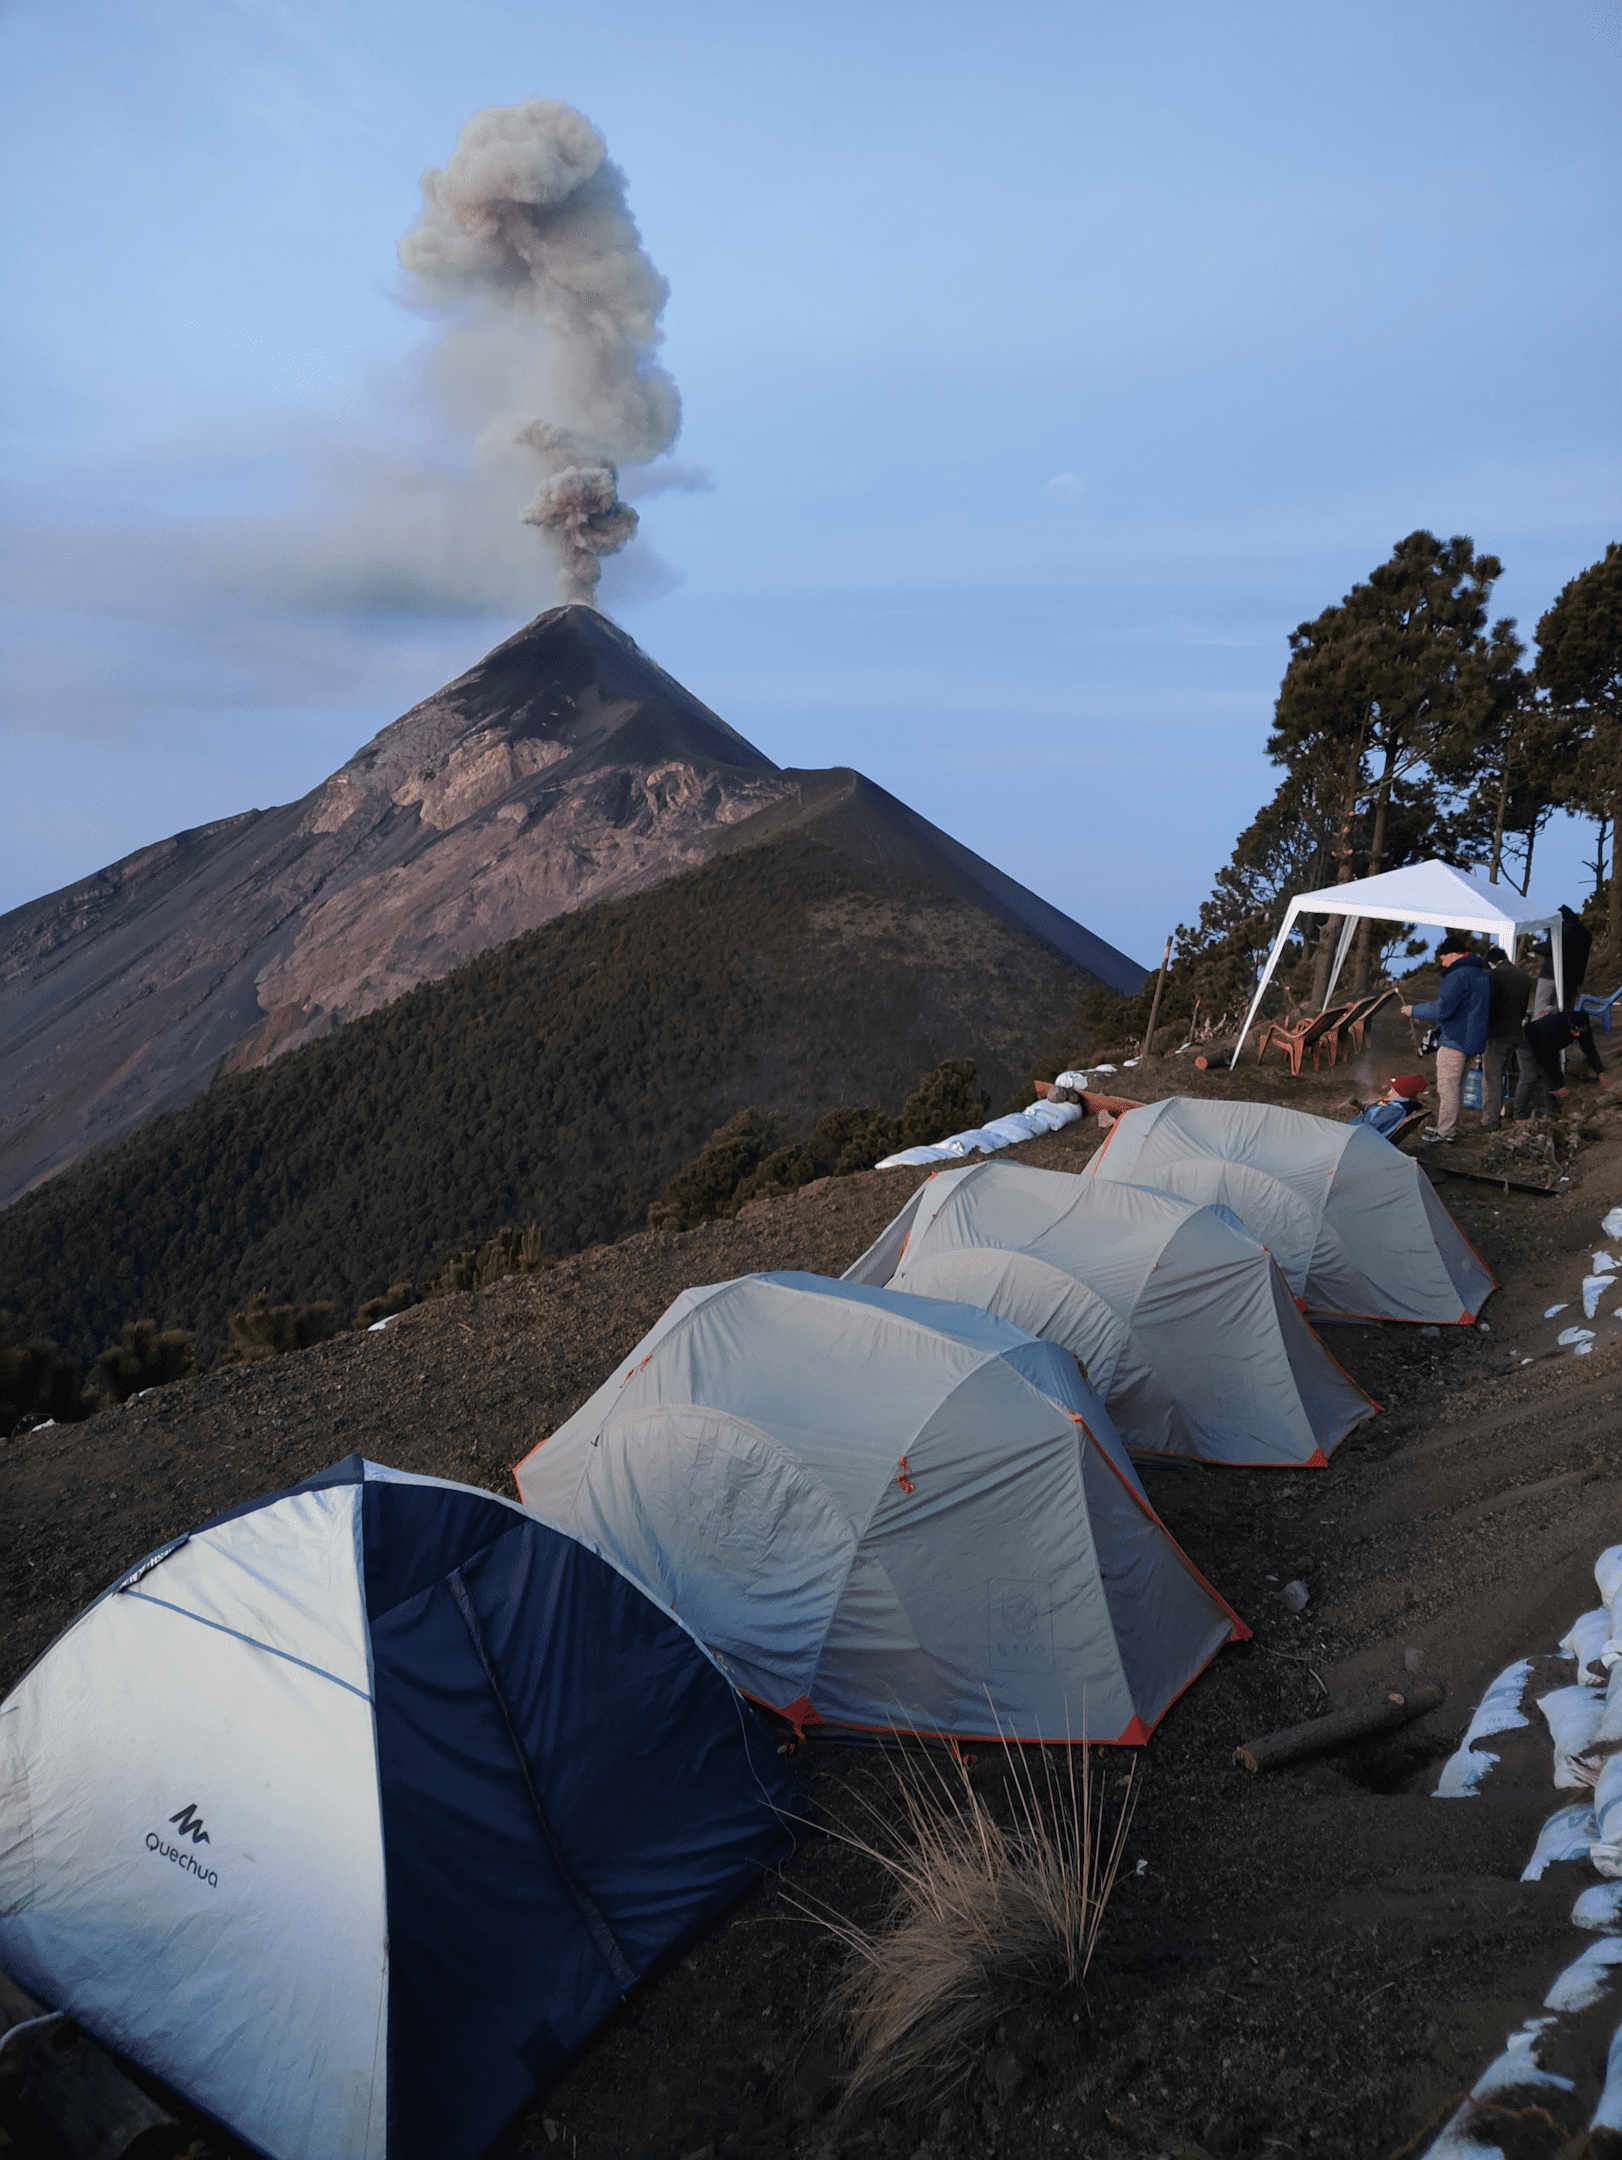 Camping on Volcan Acatenango with views of Volan Fuego erupting.